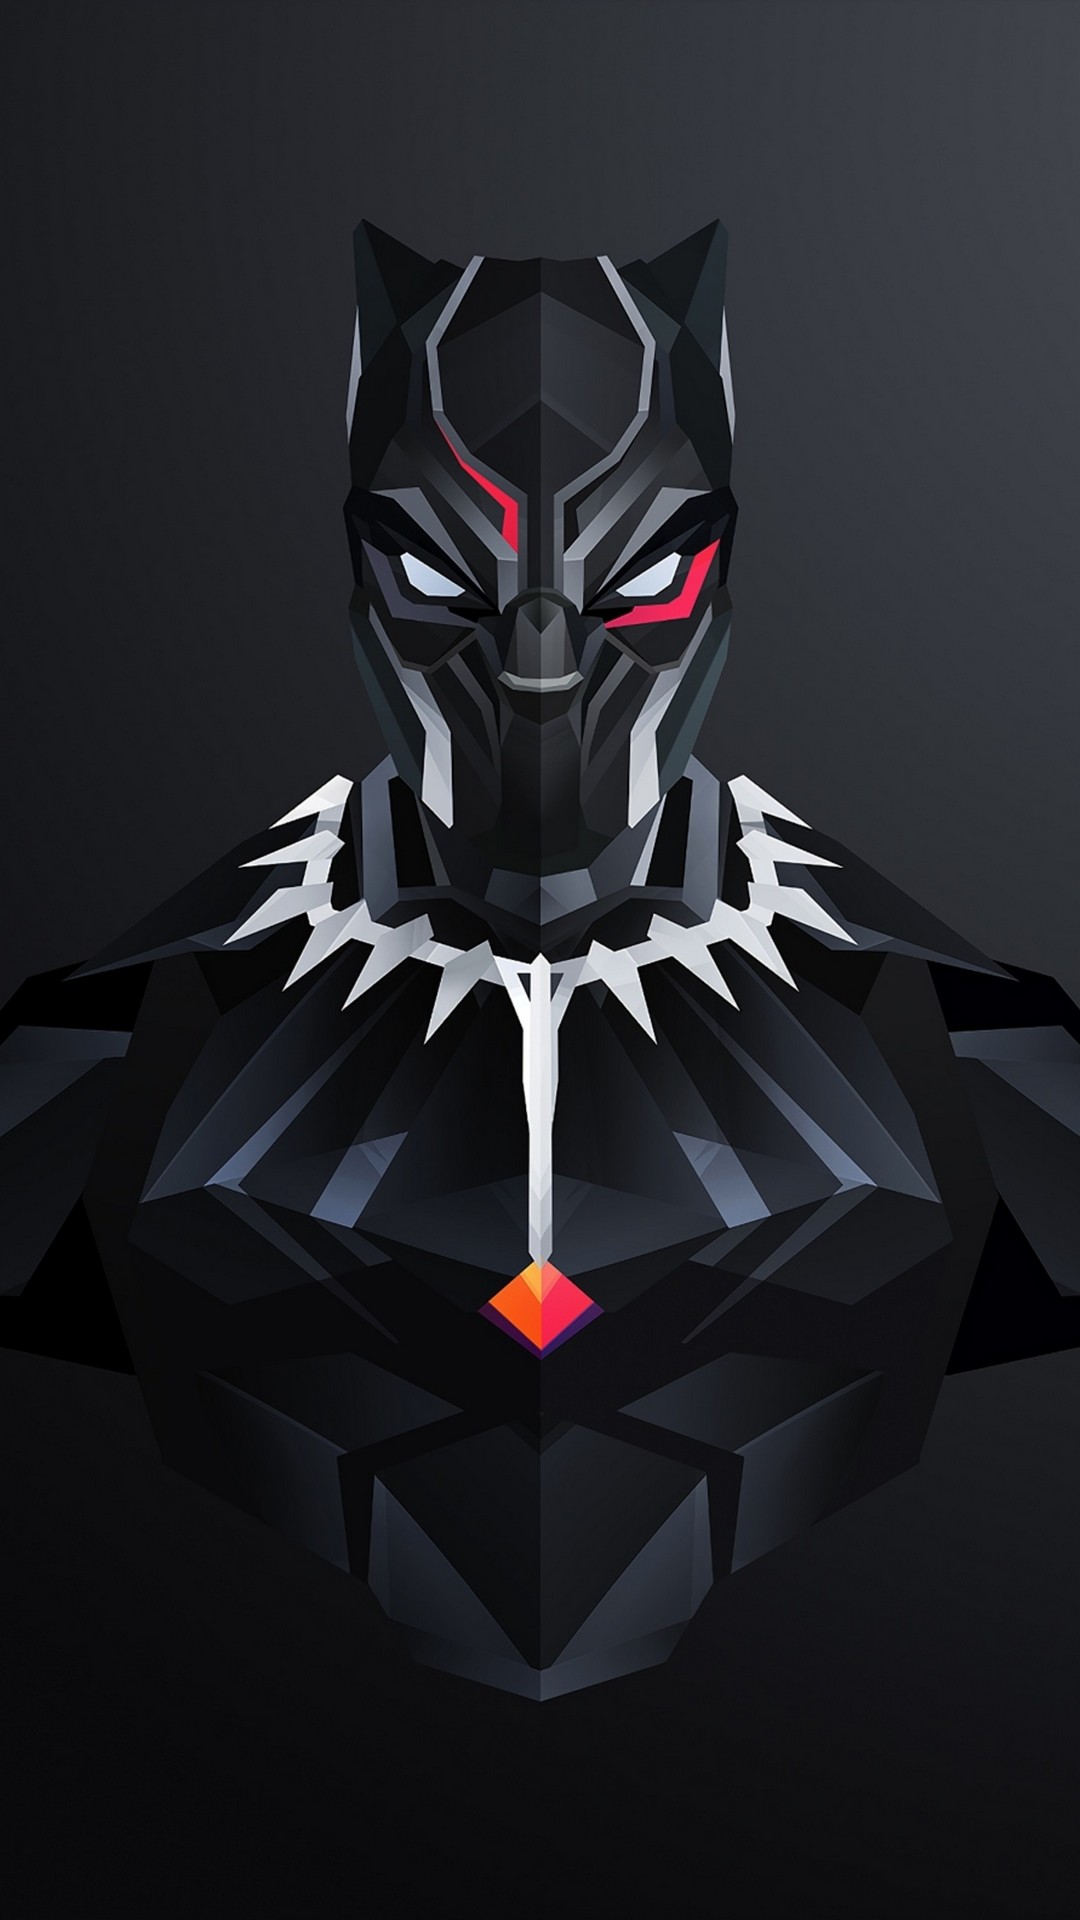 Android Wallpaper HD Black Panther With high-resolution 1080X1920 pixel. You can use this wallpaper for your Android backgrounds, Tablet, Samsung Screensavers, Mobile Phone Lock Screen and another Smartphones device